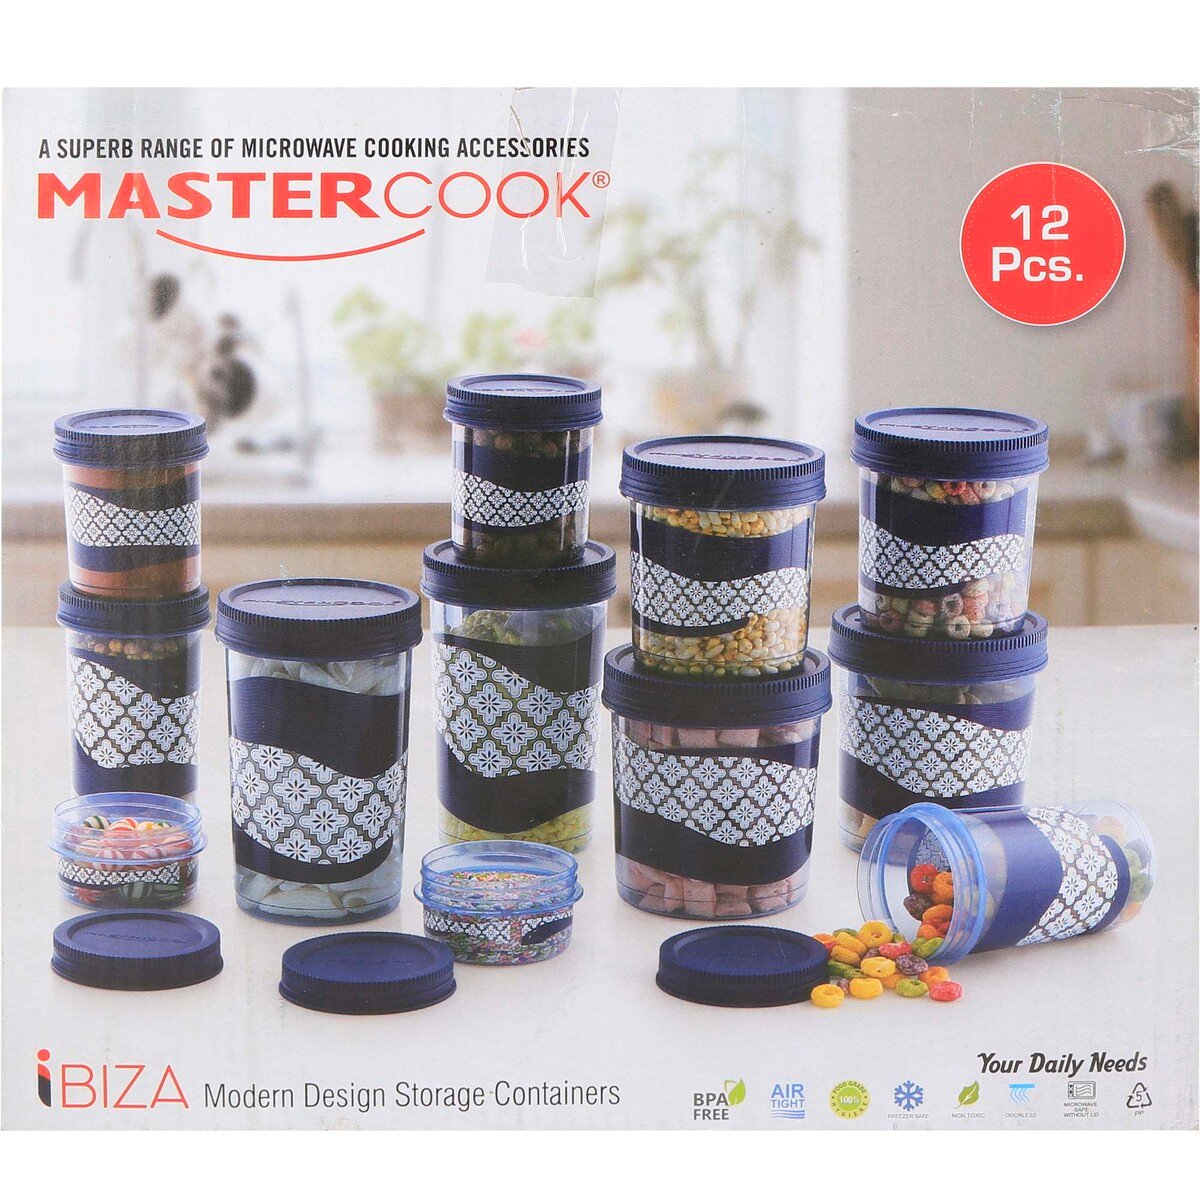 Master Cook Ibiza Food Containers Print 12pcs